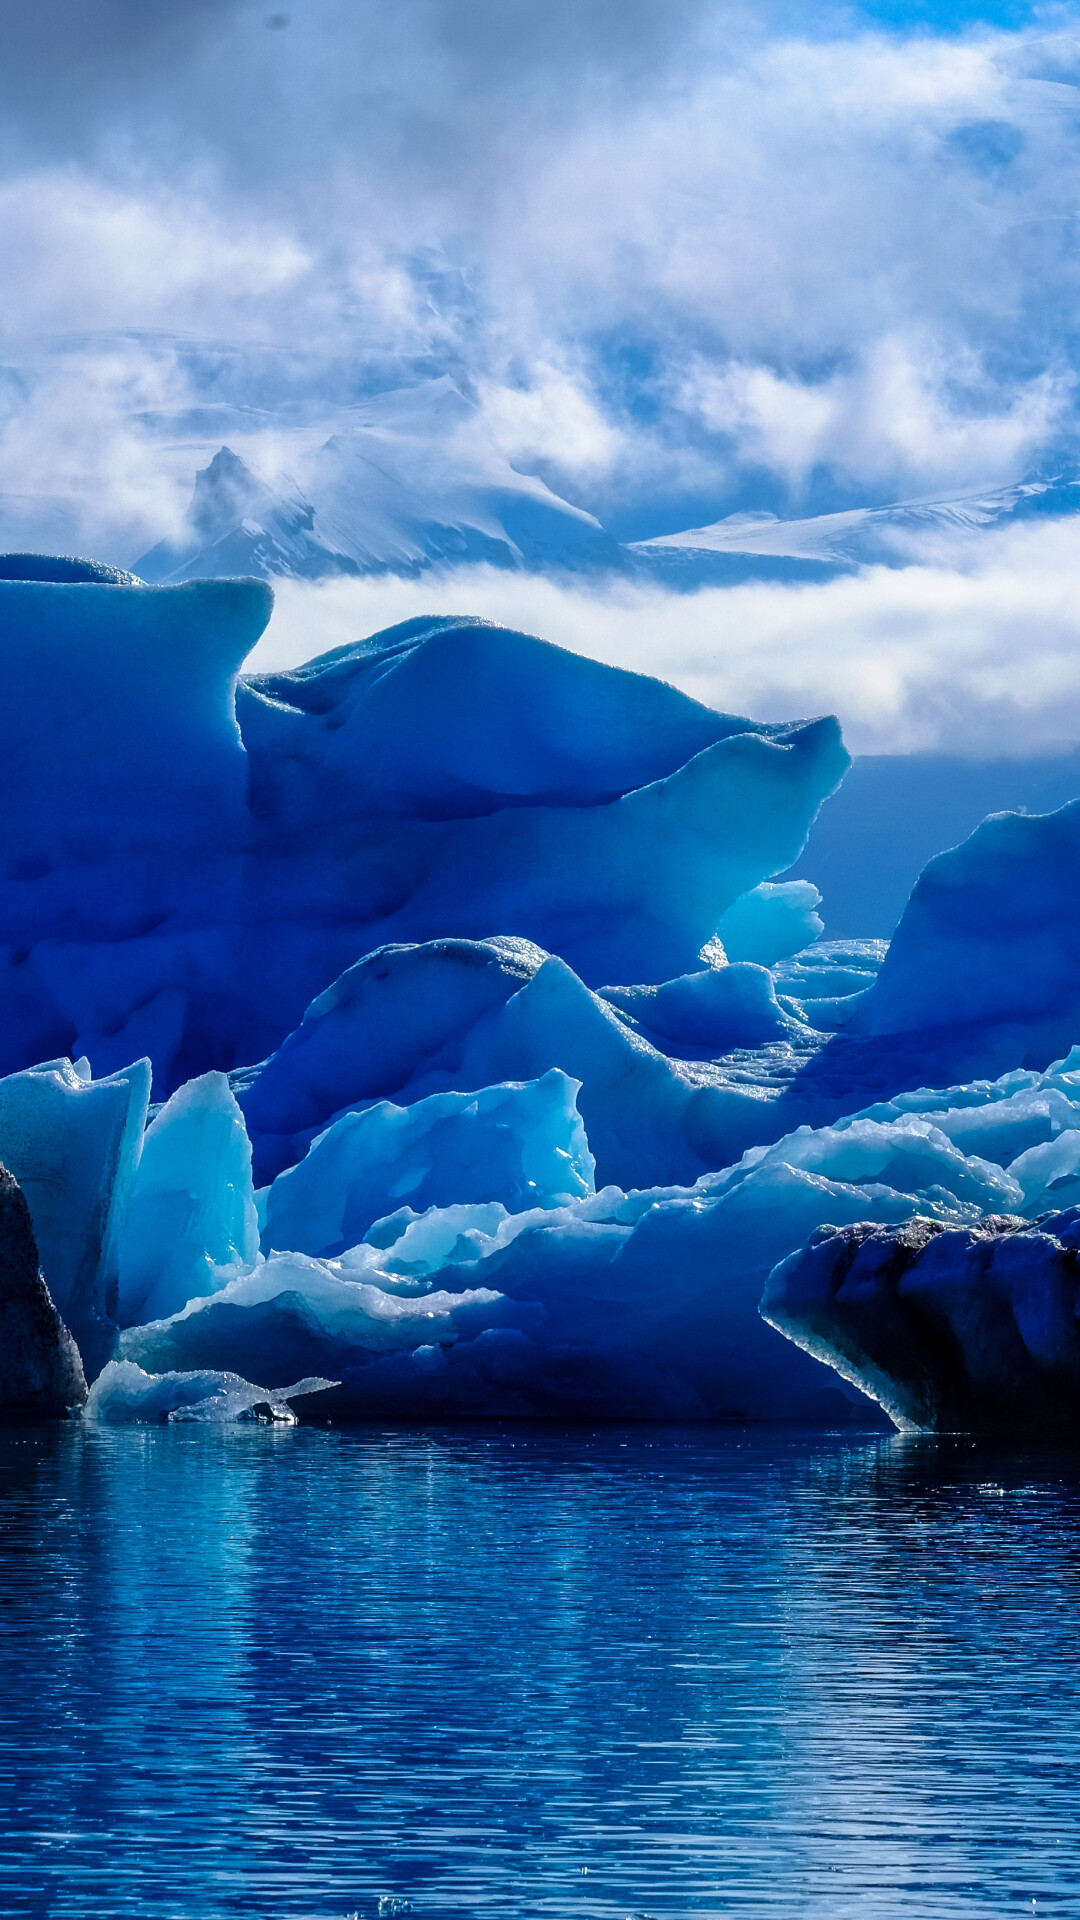 Glacier: Blue ice lagoon, Ice mass that forms only on land, The solid form of water. 1080x1920 Full HD Background.